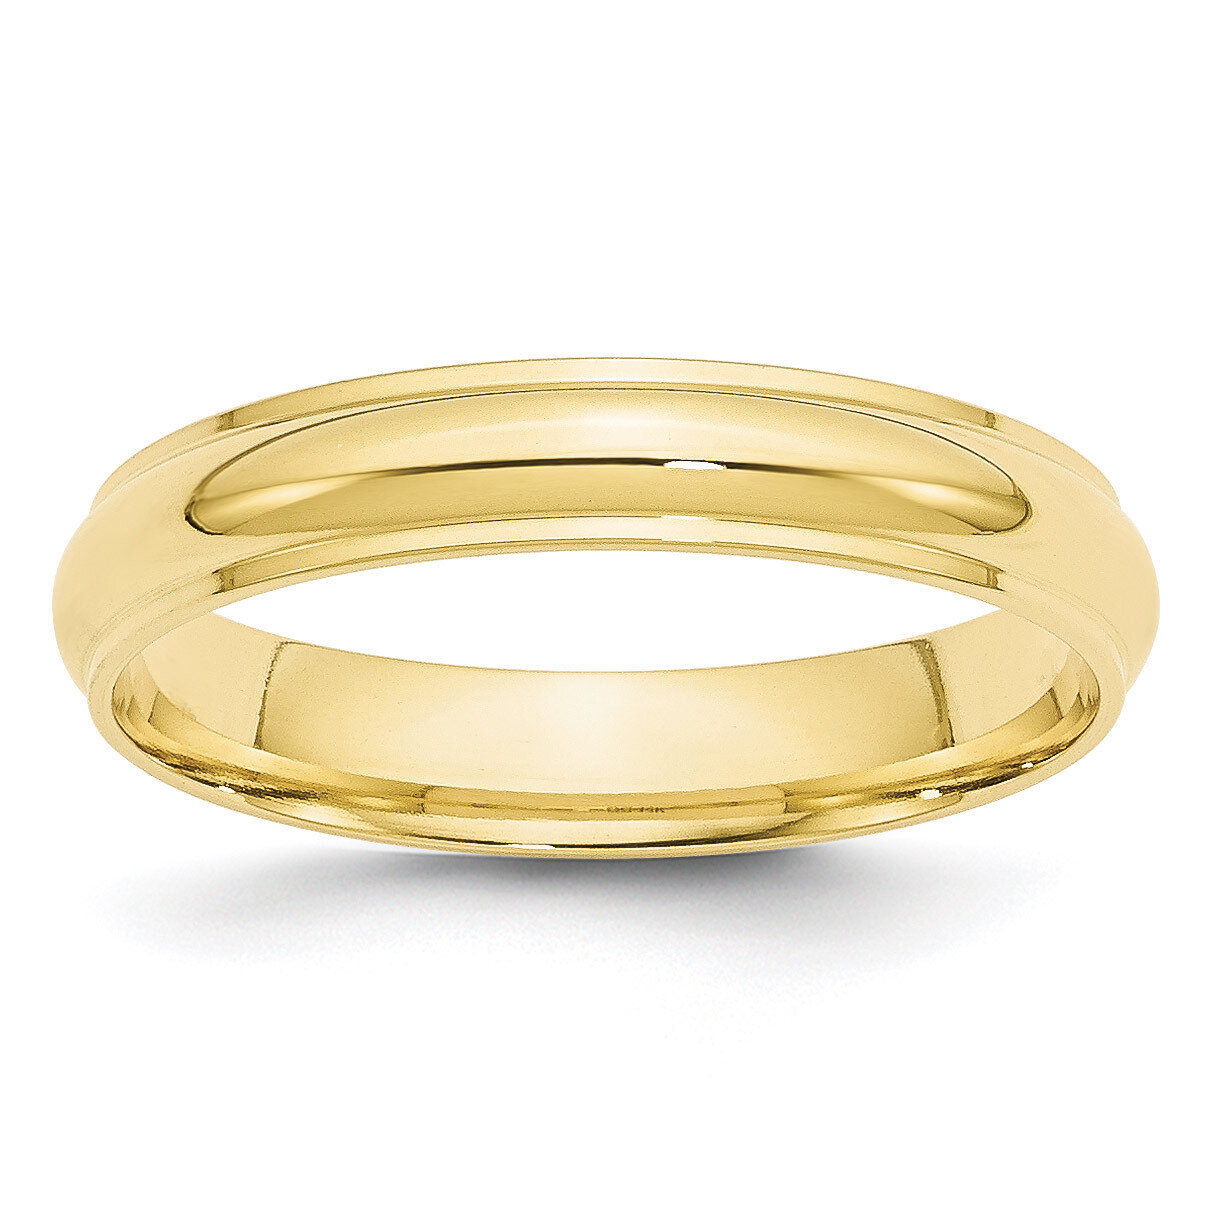 4mm Half Round with Edge Band 10k Yellow Gold 1HRE040 Engravable